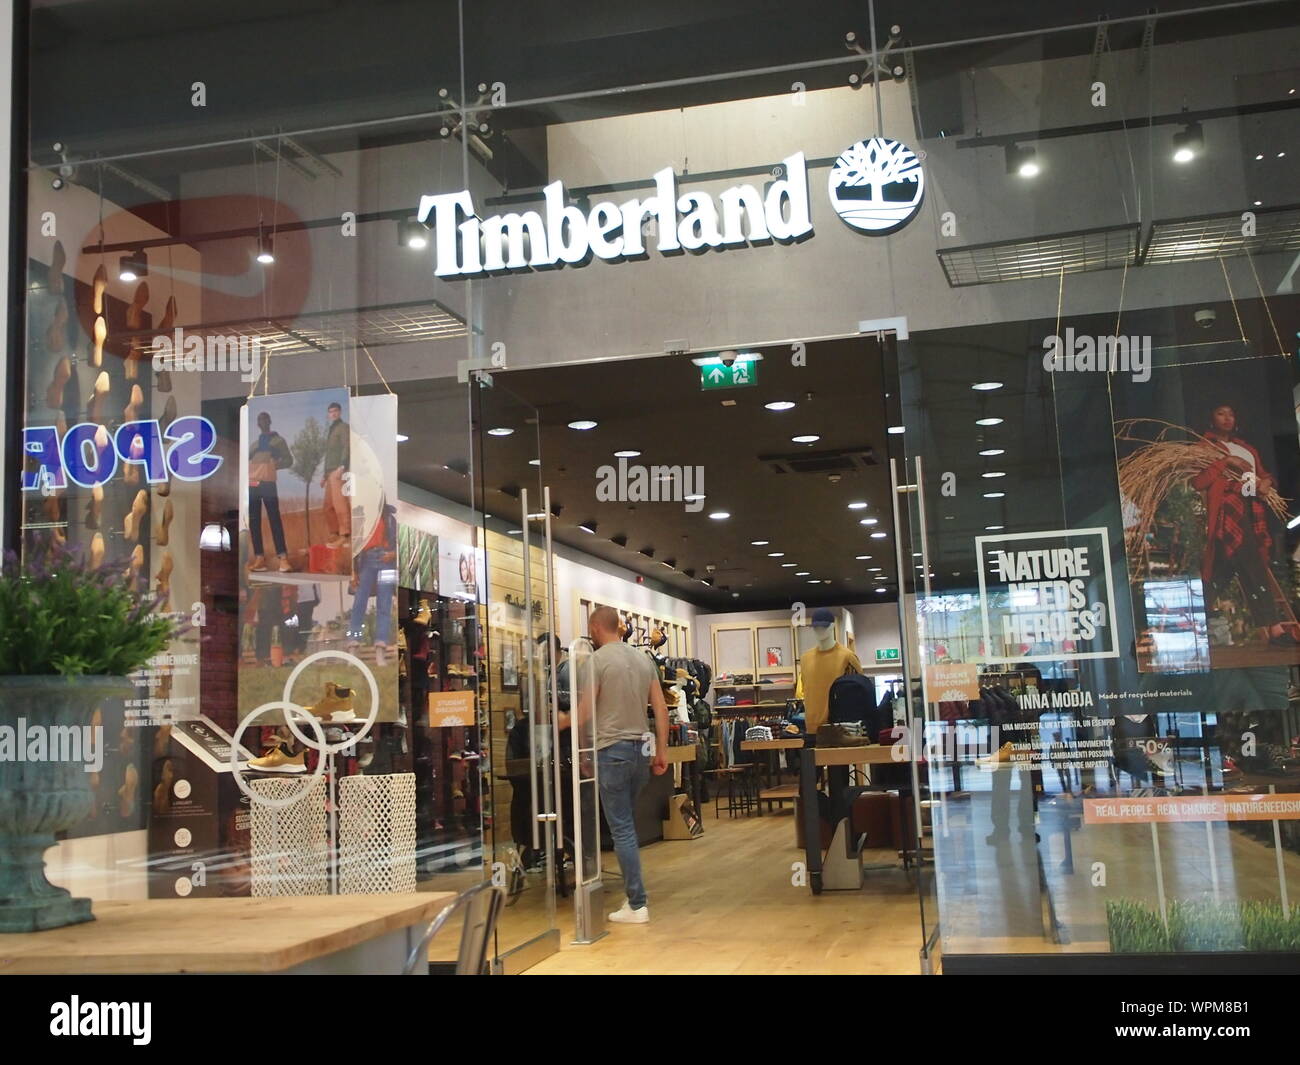 Timberland Uk High Resolution Stock Photography and Images - Alamy